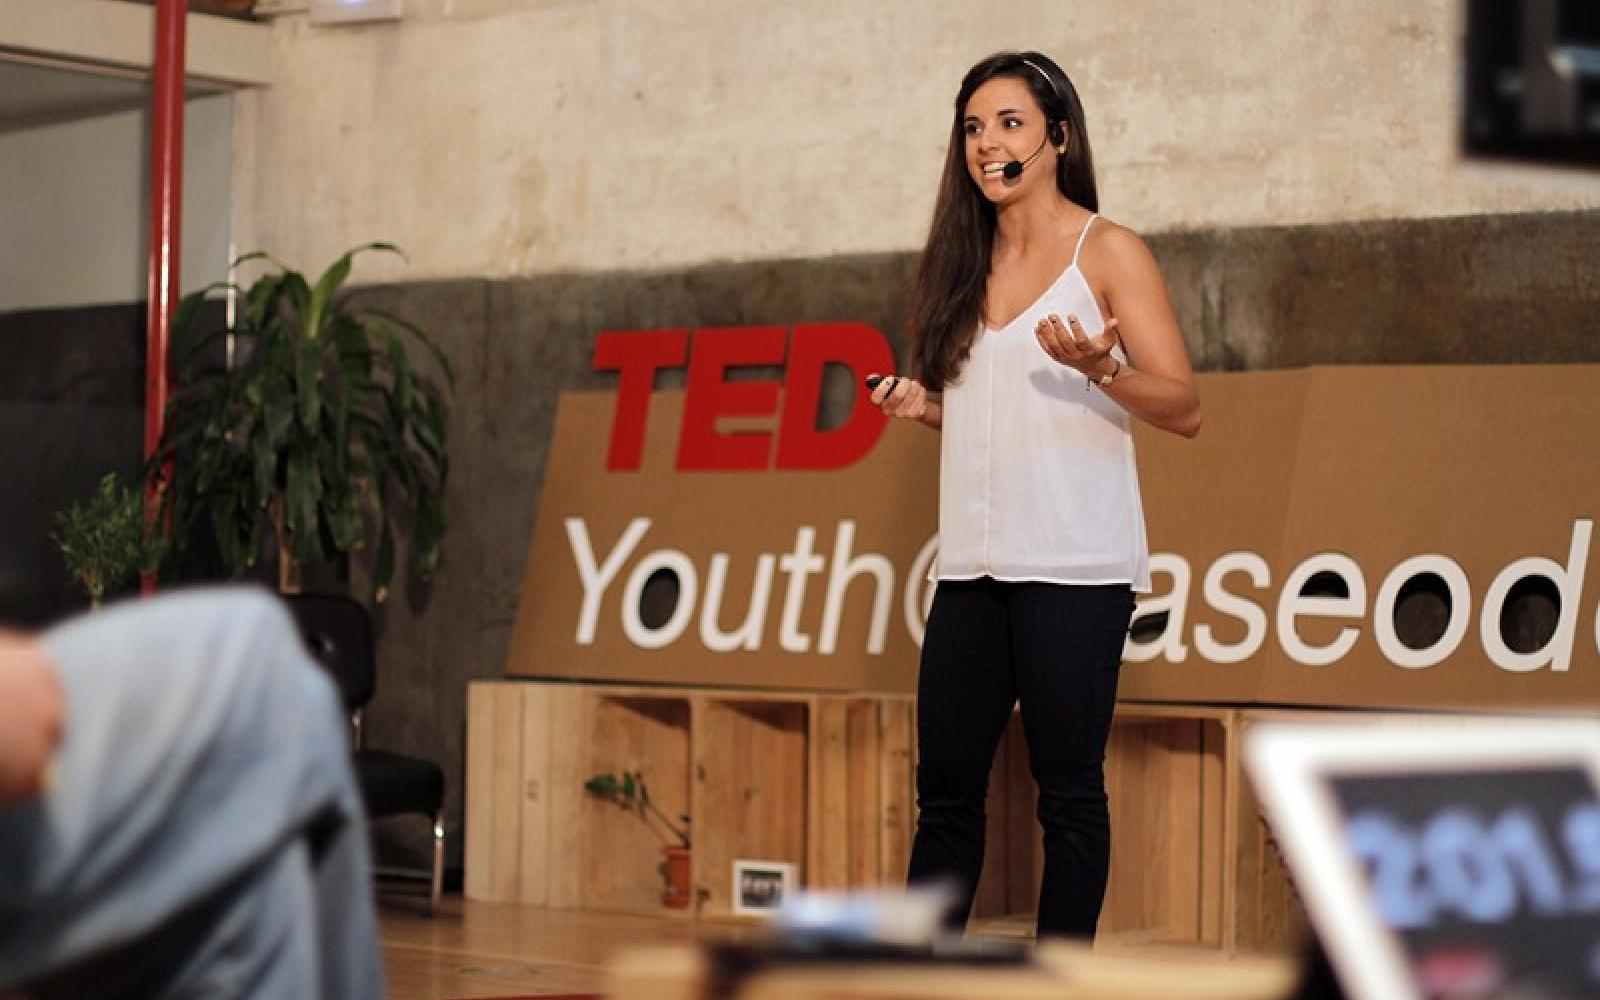 Youth TedX Spain